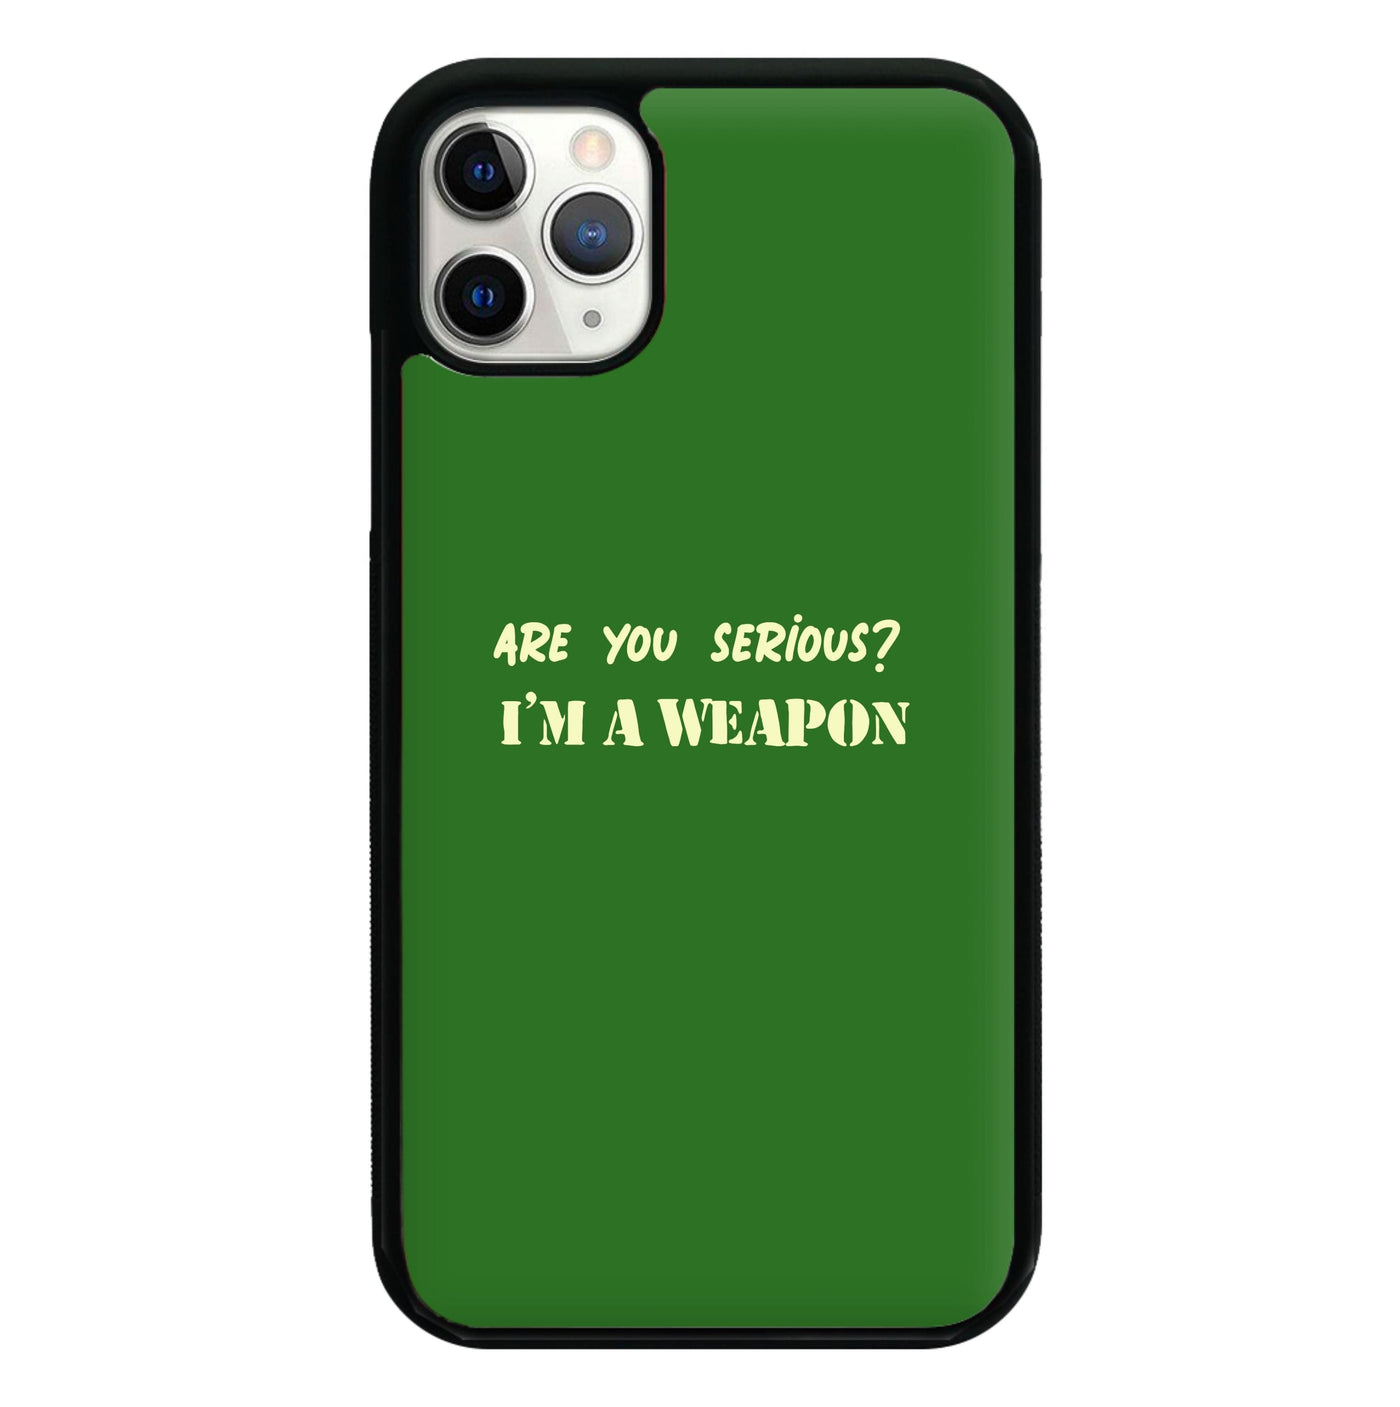 Are You Serious? I'm A Weapon - Islanders Phone Case